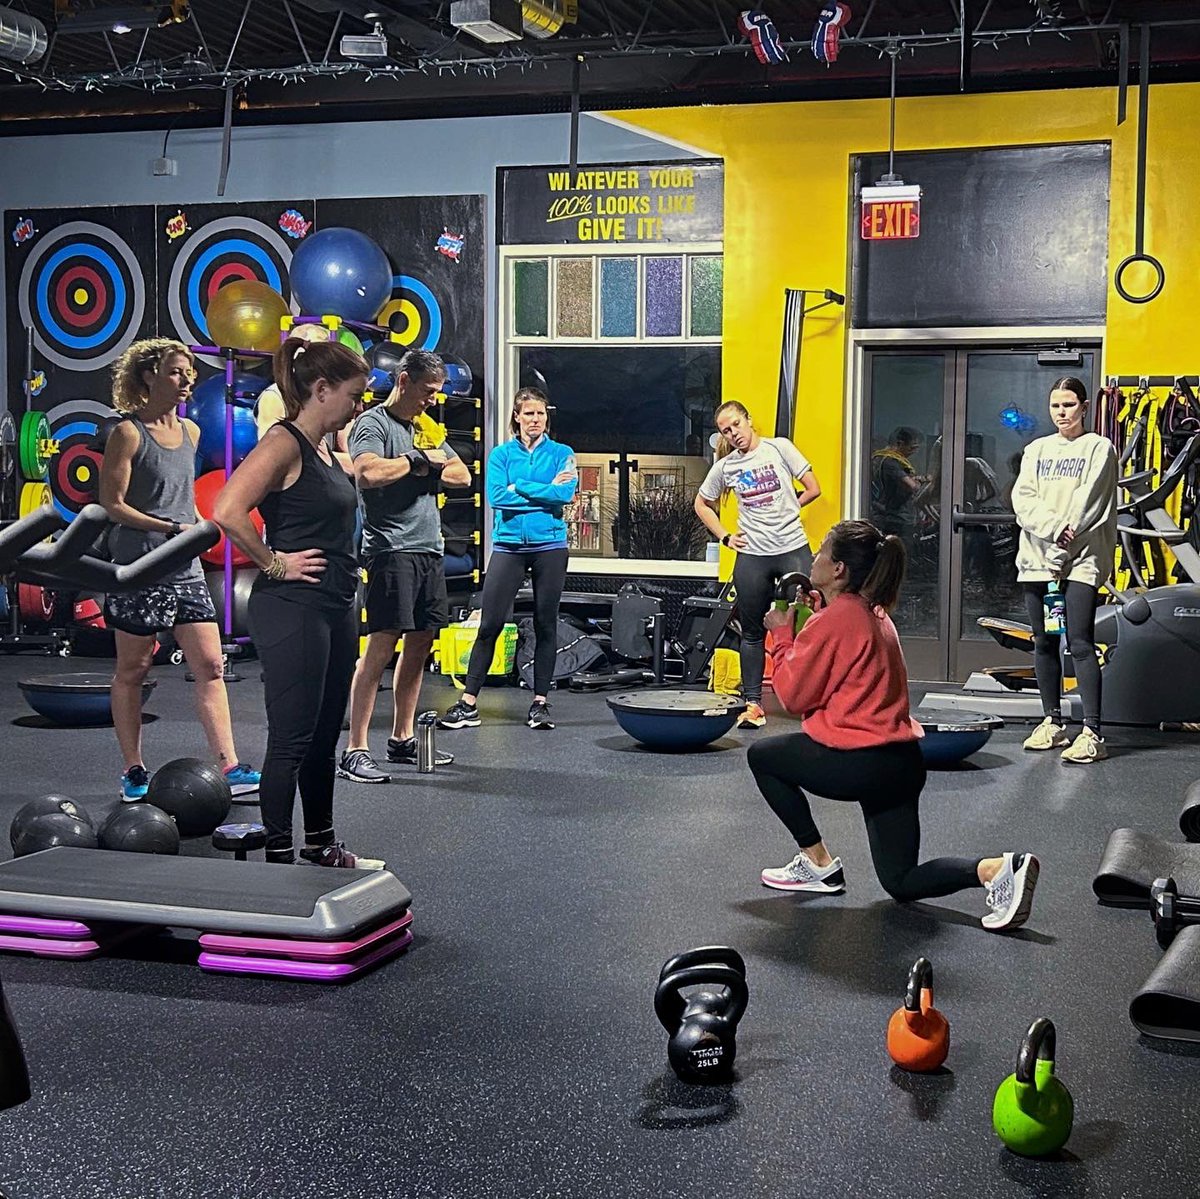 Our instructors help members conquer the new year! 👇

Group training is a great way to push even harder and have more fun. All while our instructors guide you to proper workout.

Interested in joining? DM us for details!

#fitness #perkasiepa #sellersvillepa #gym #motivation